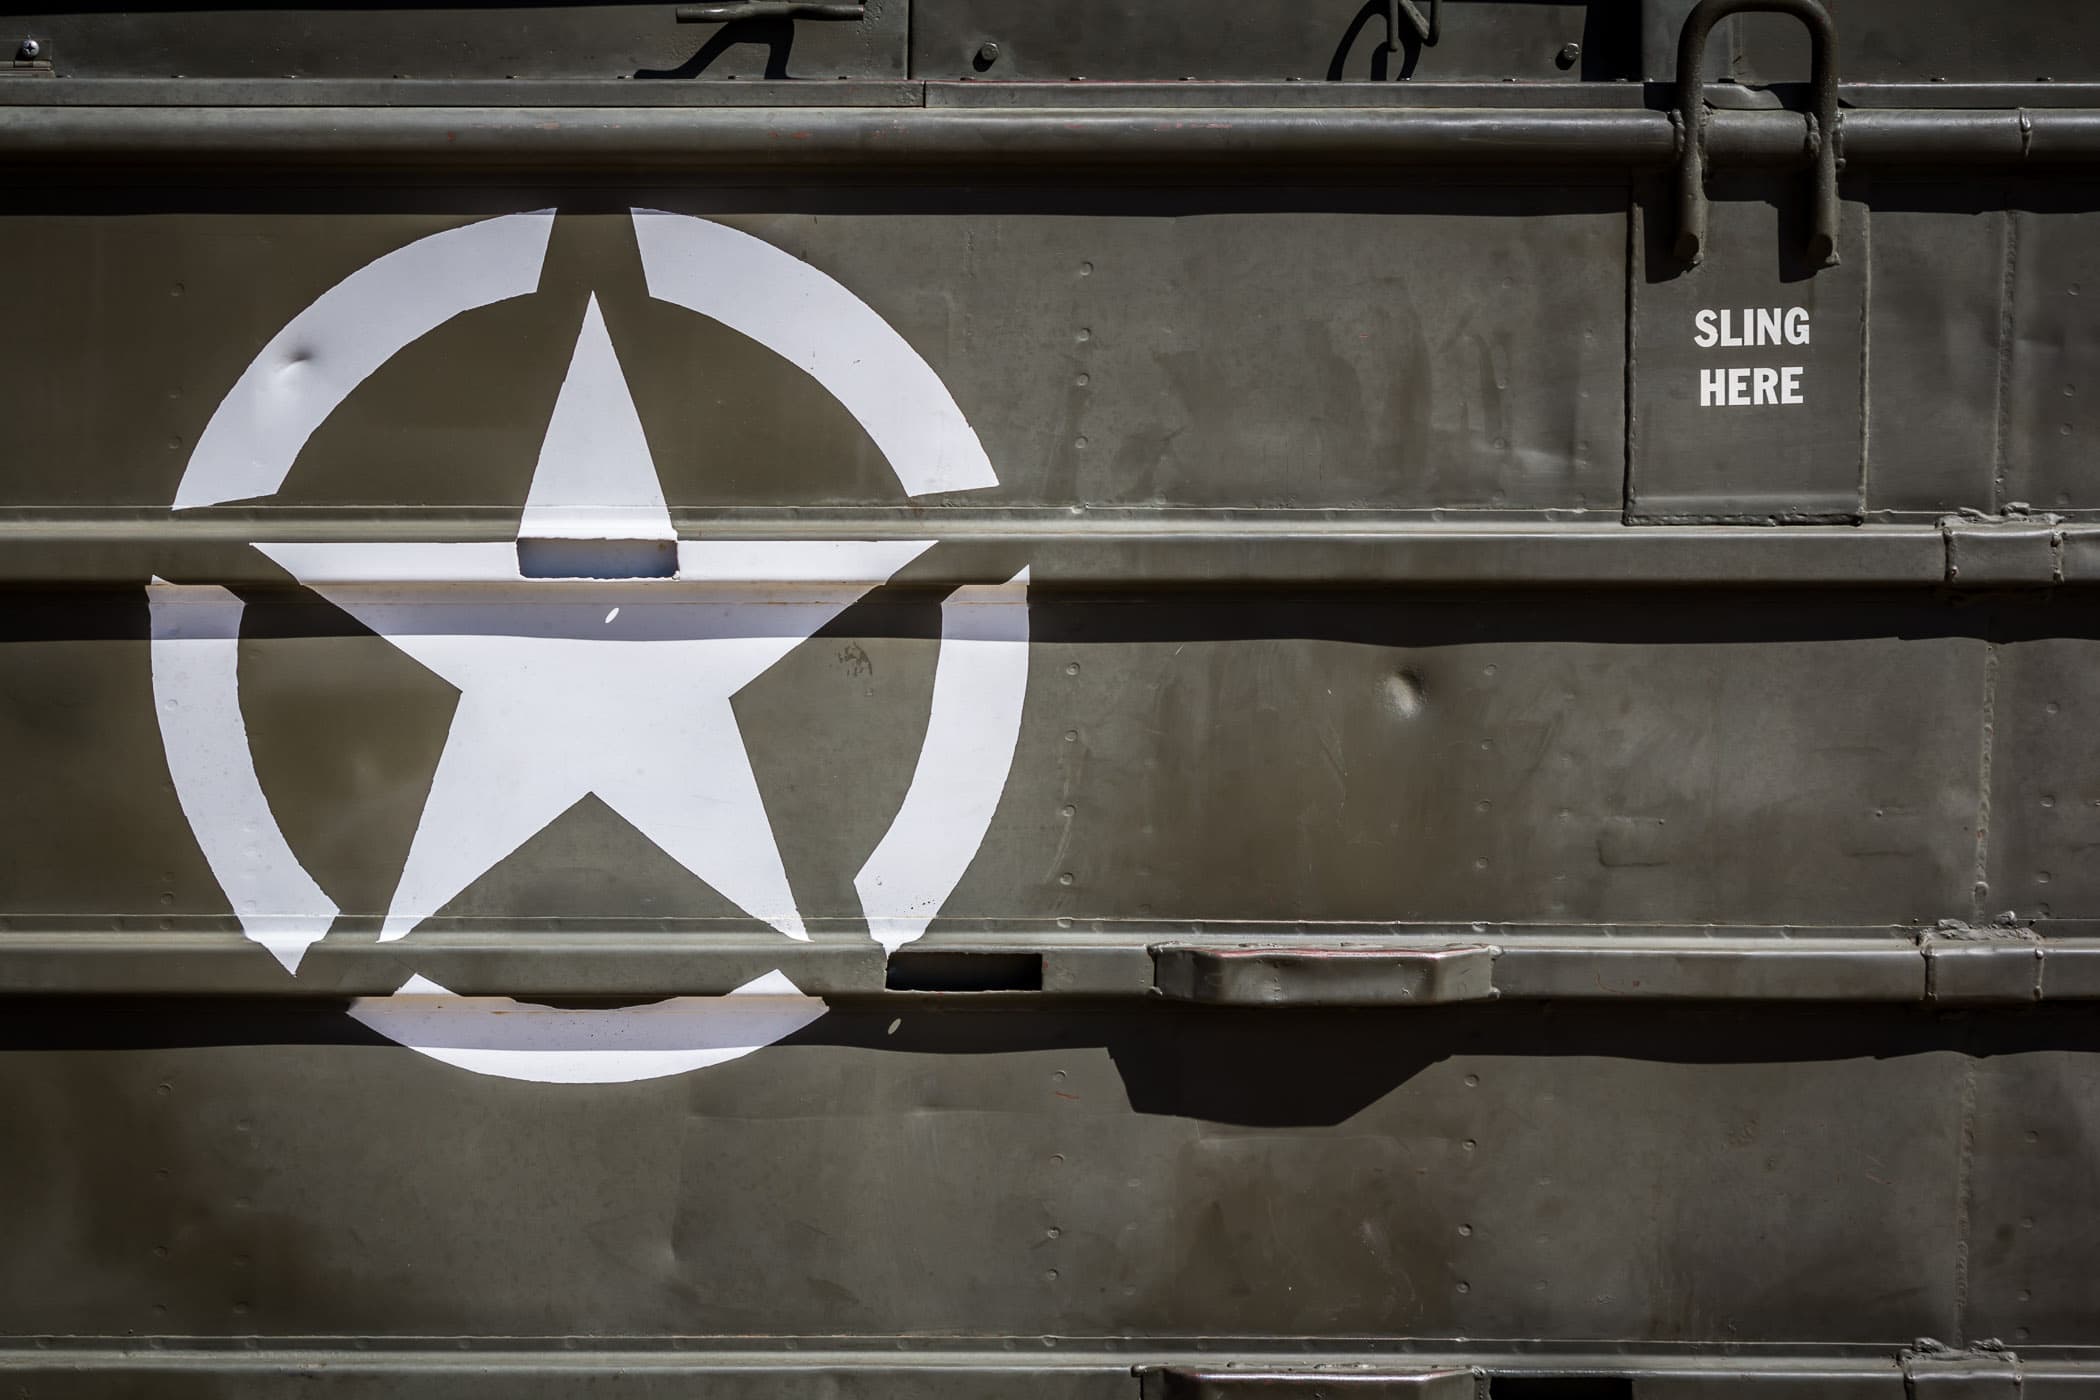 Labeling spotted on a U.S. Army DUKW amphibious vehicle at Addison, Texas' Cavanaugh Flight Museum.